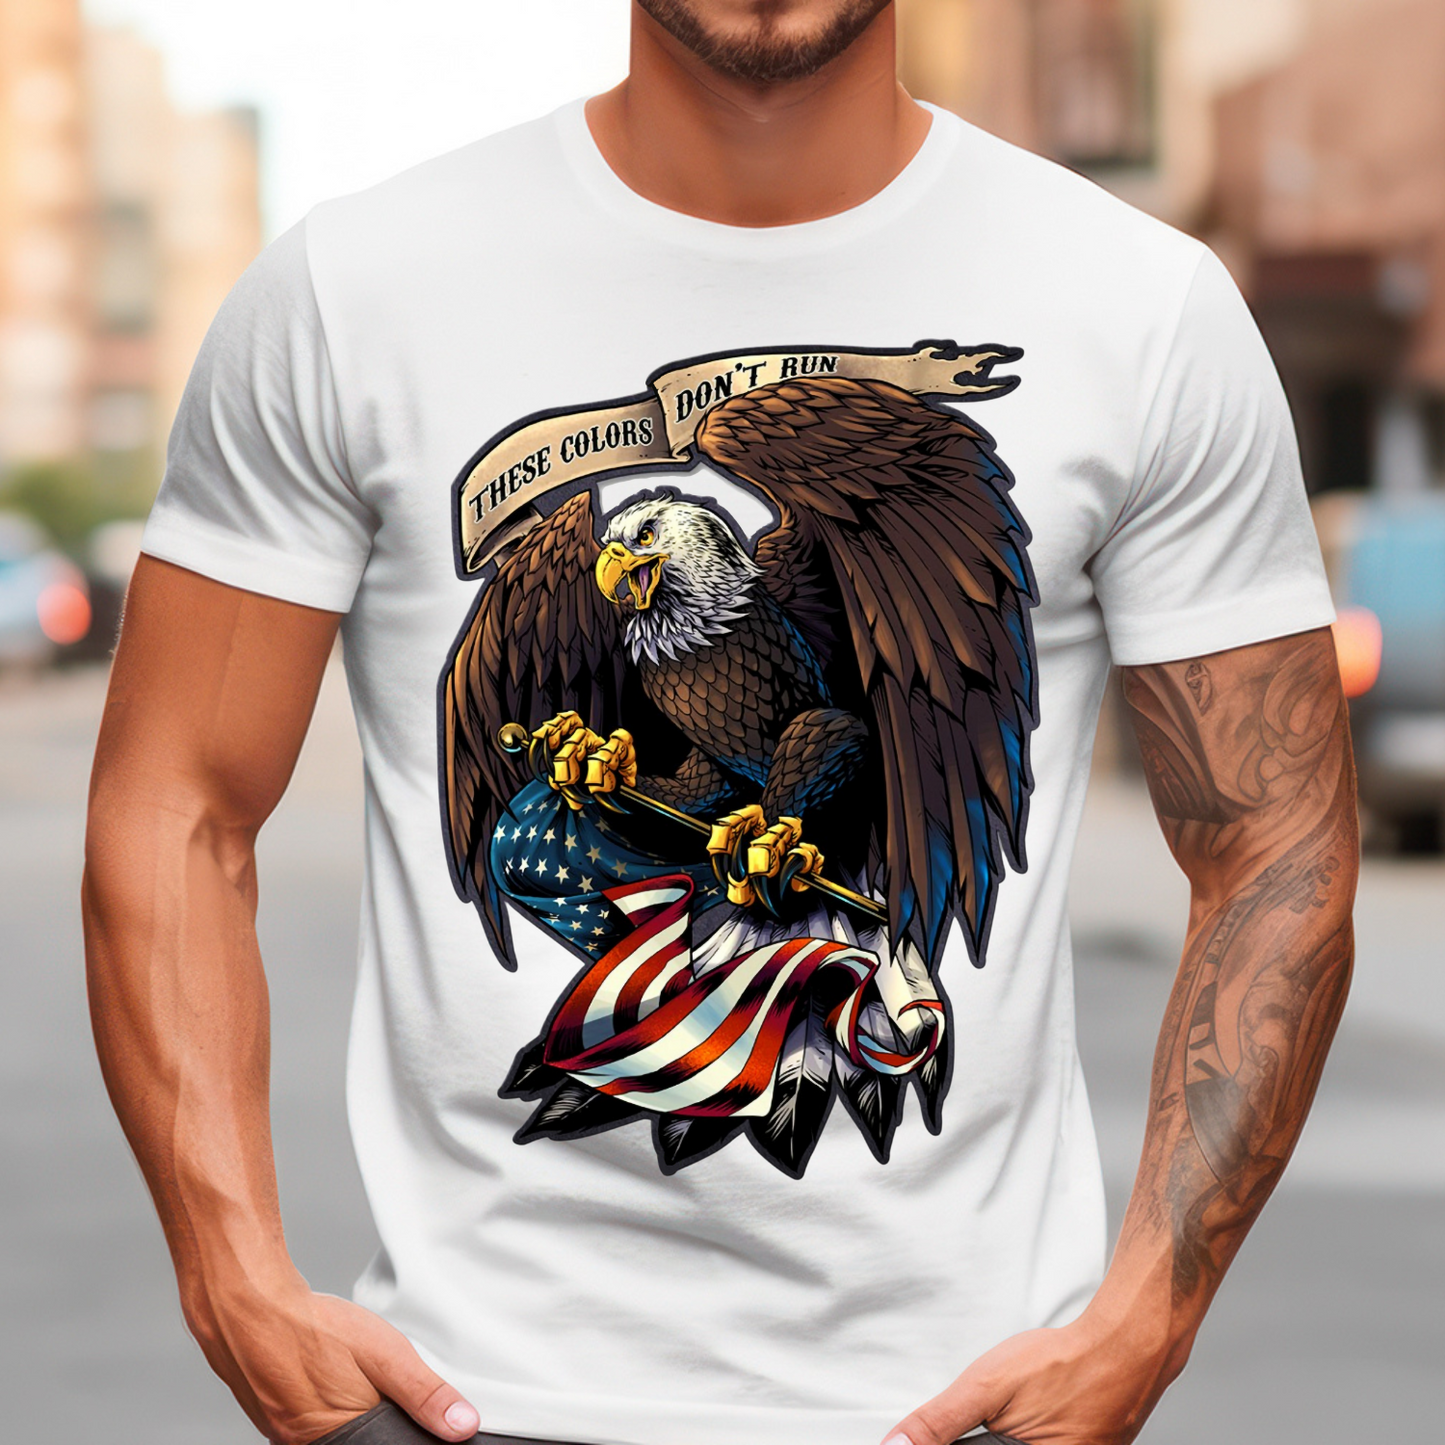 These colors don't run. Short sleeve sublimation T-shirt